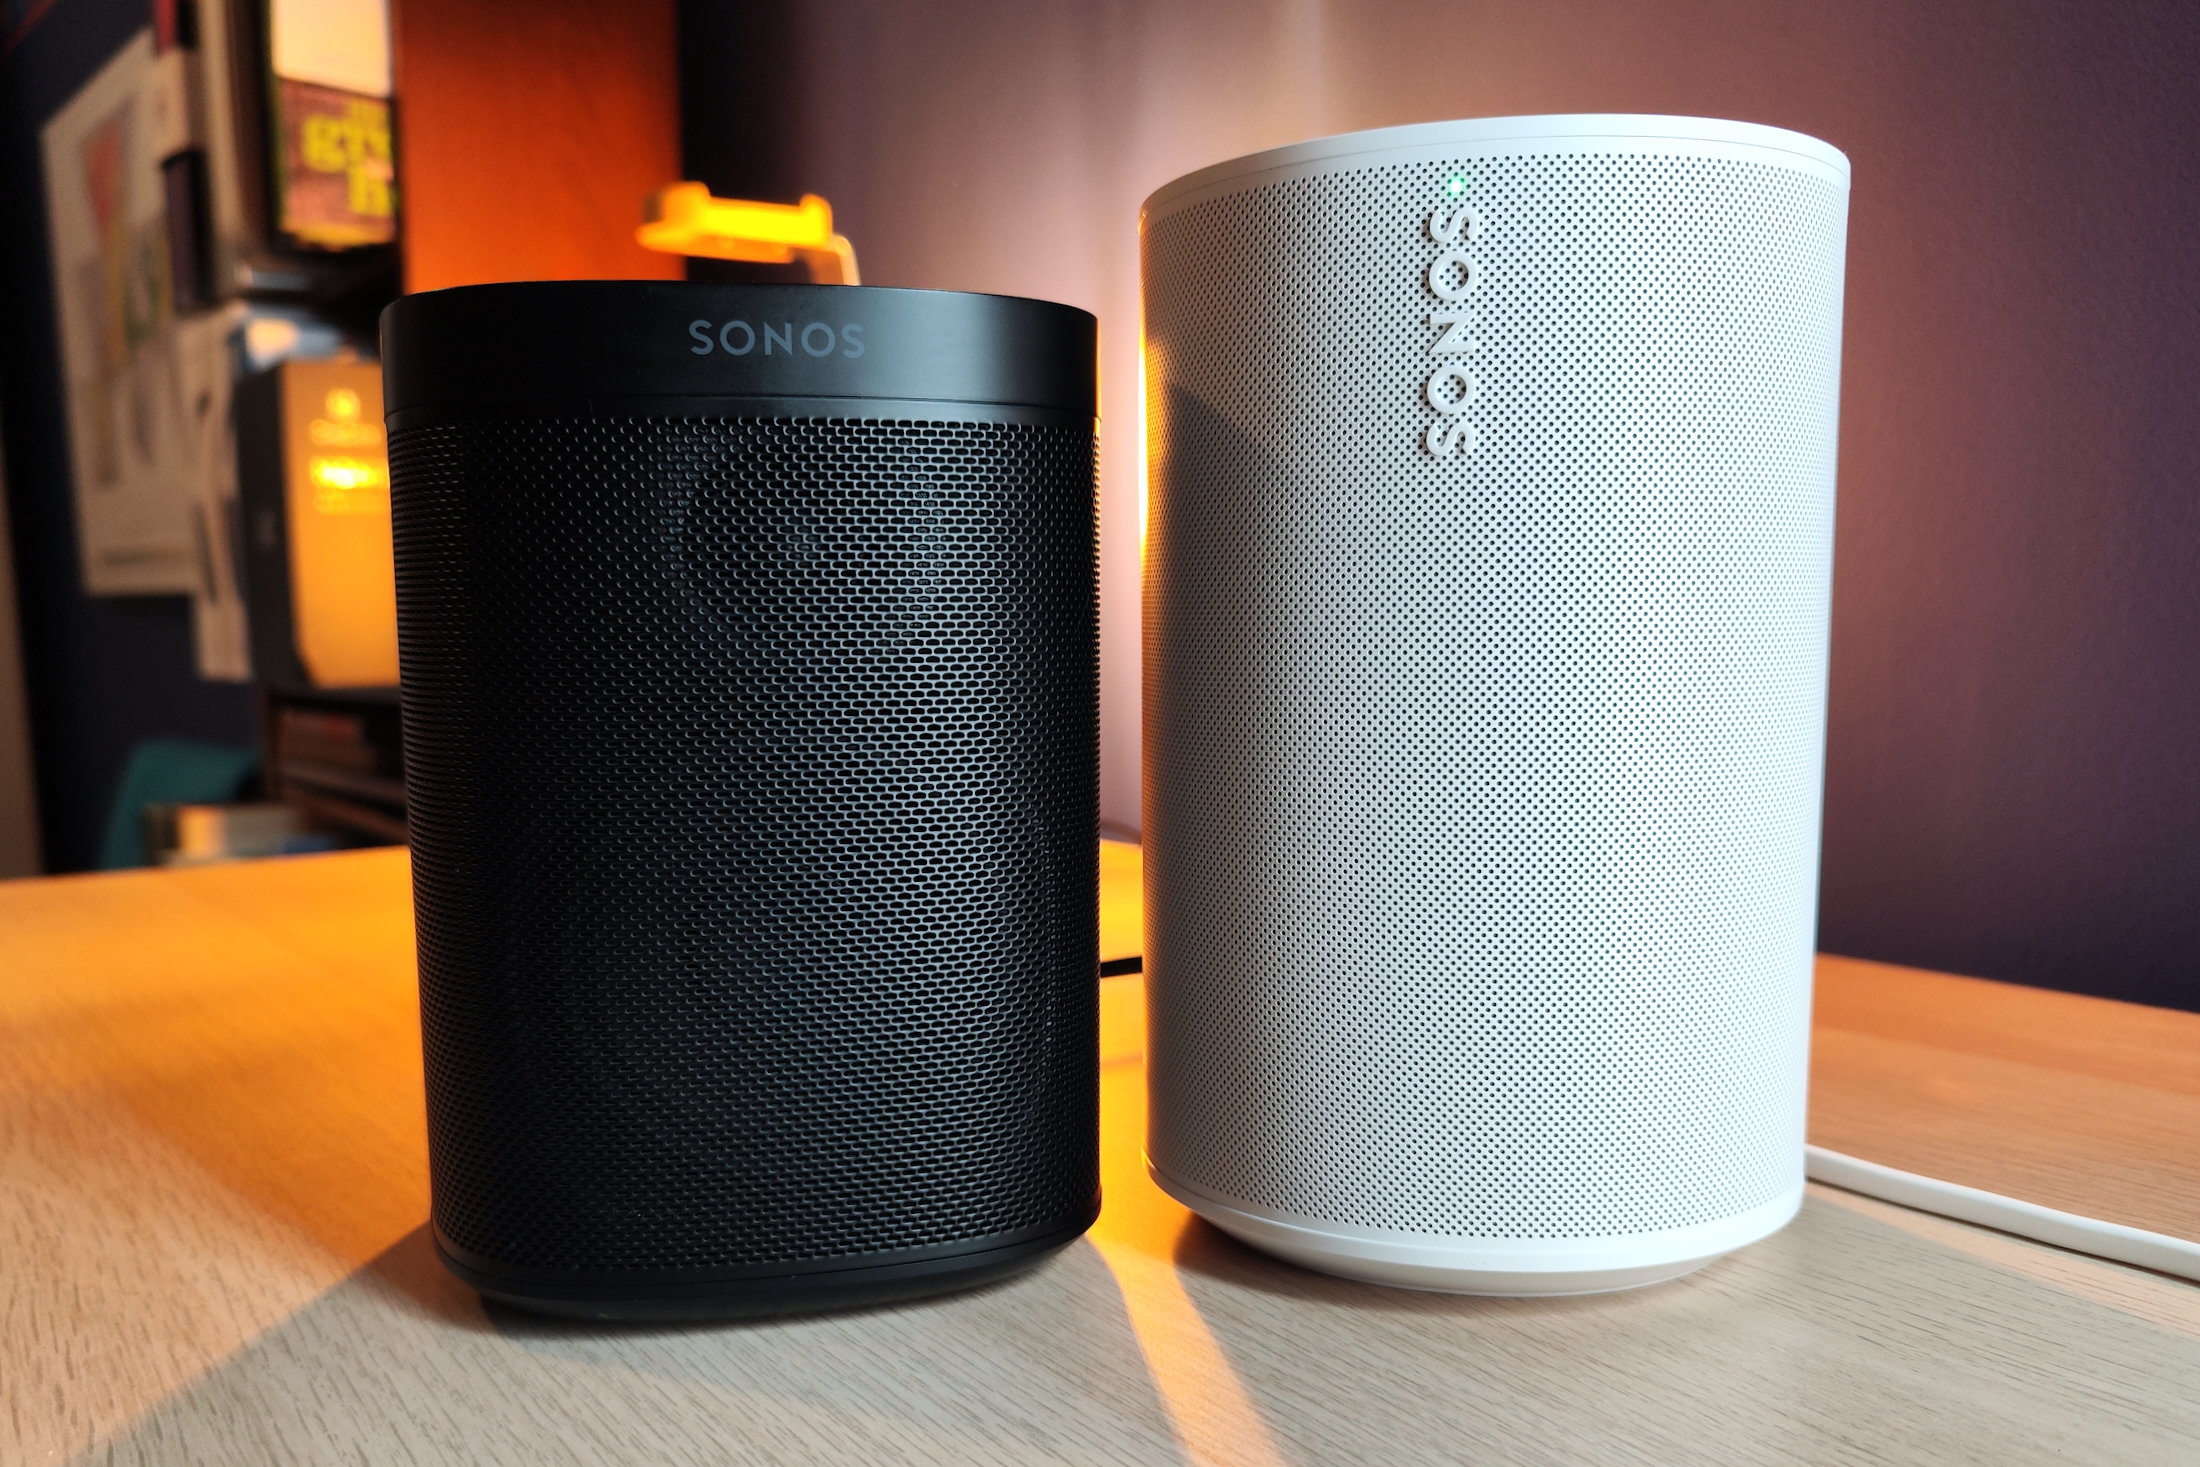 lort sjældenhed Korn Sonos problems? A new Wi-Fi router might be the answer | Digital Trends